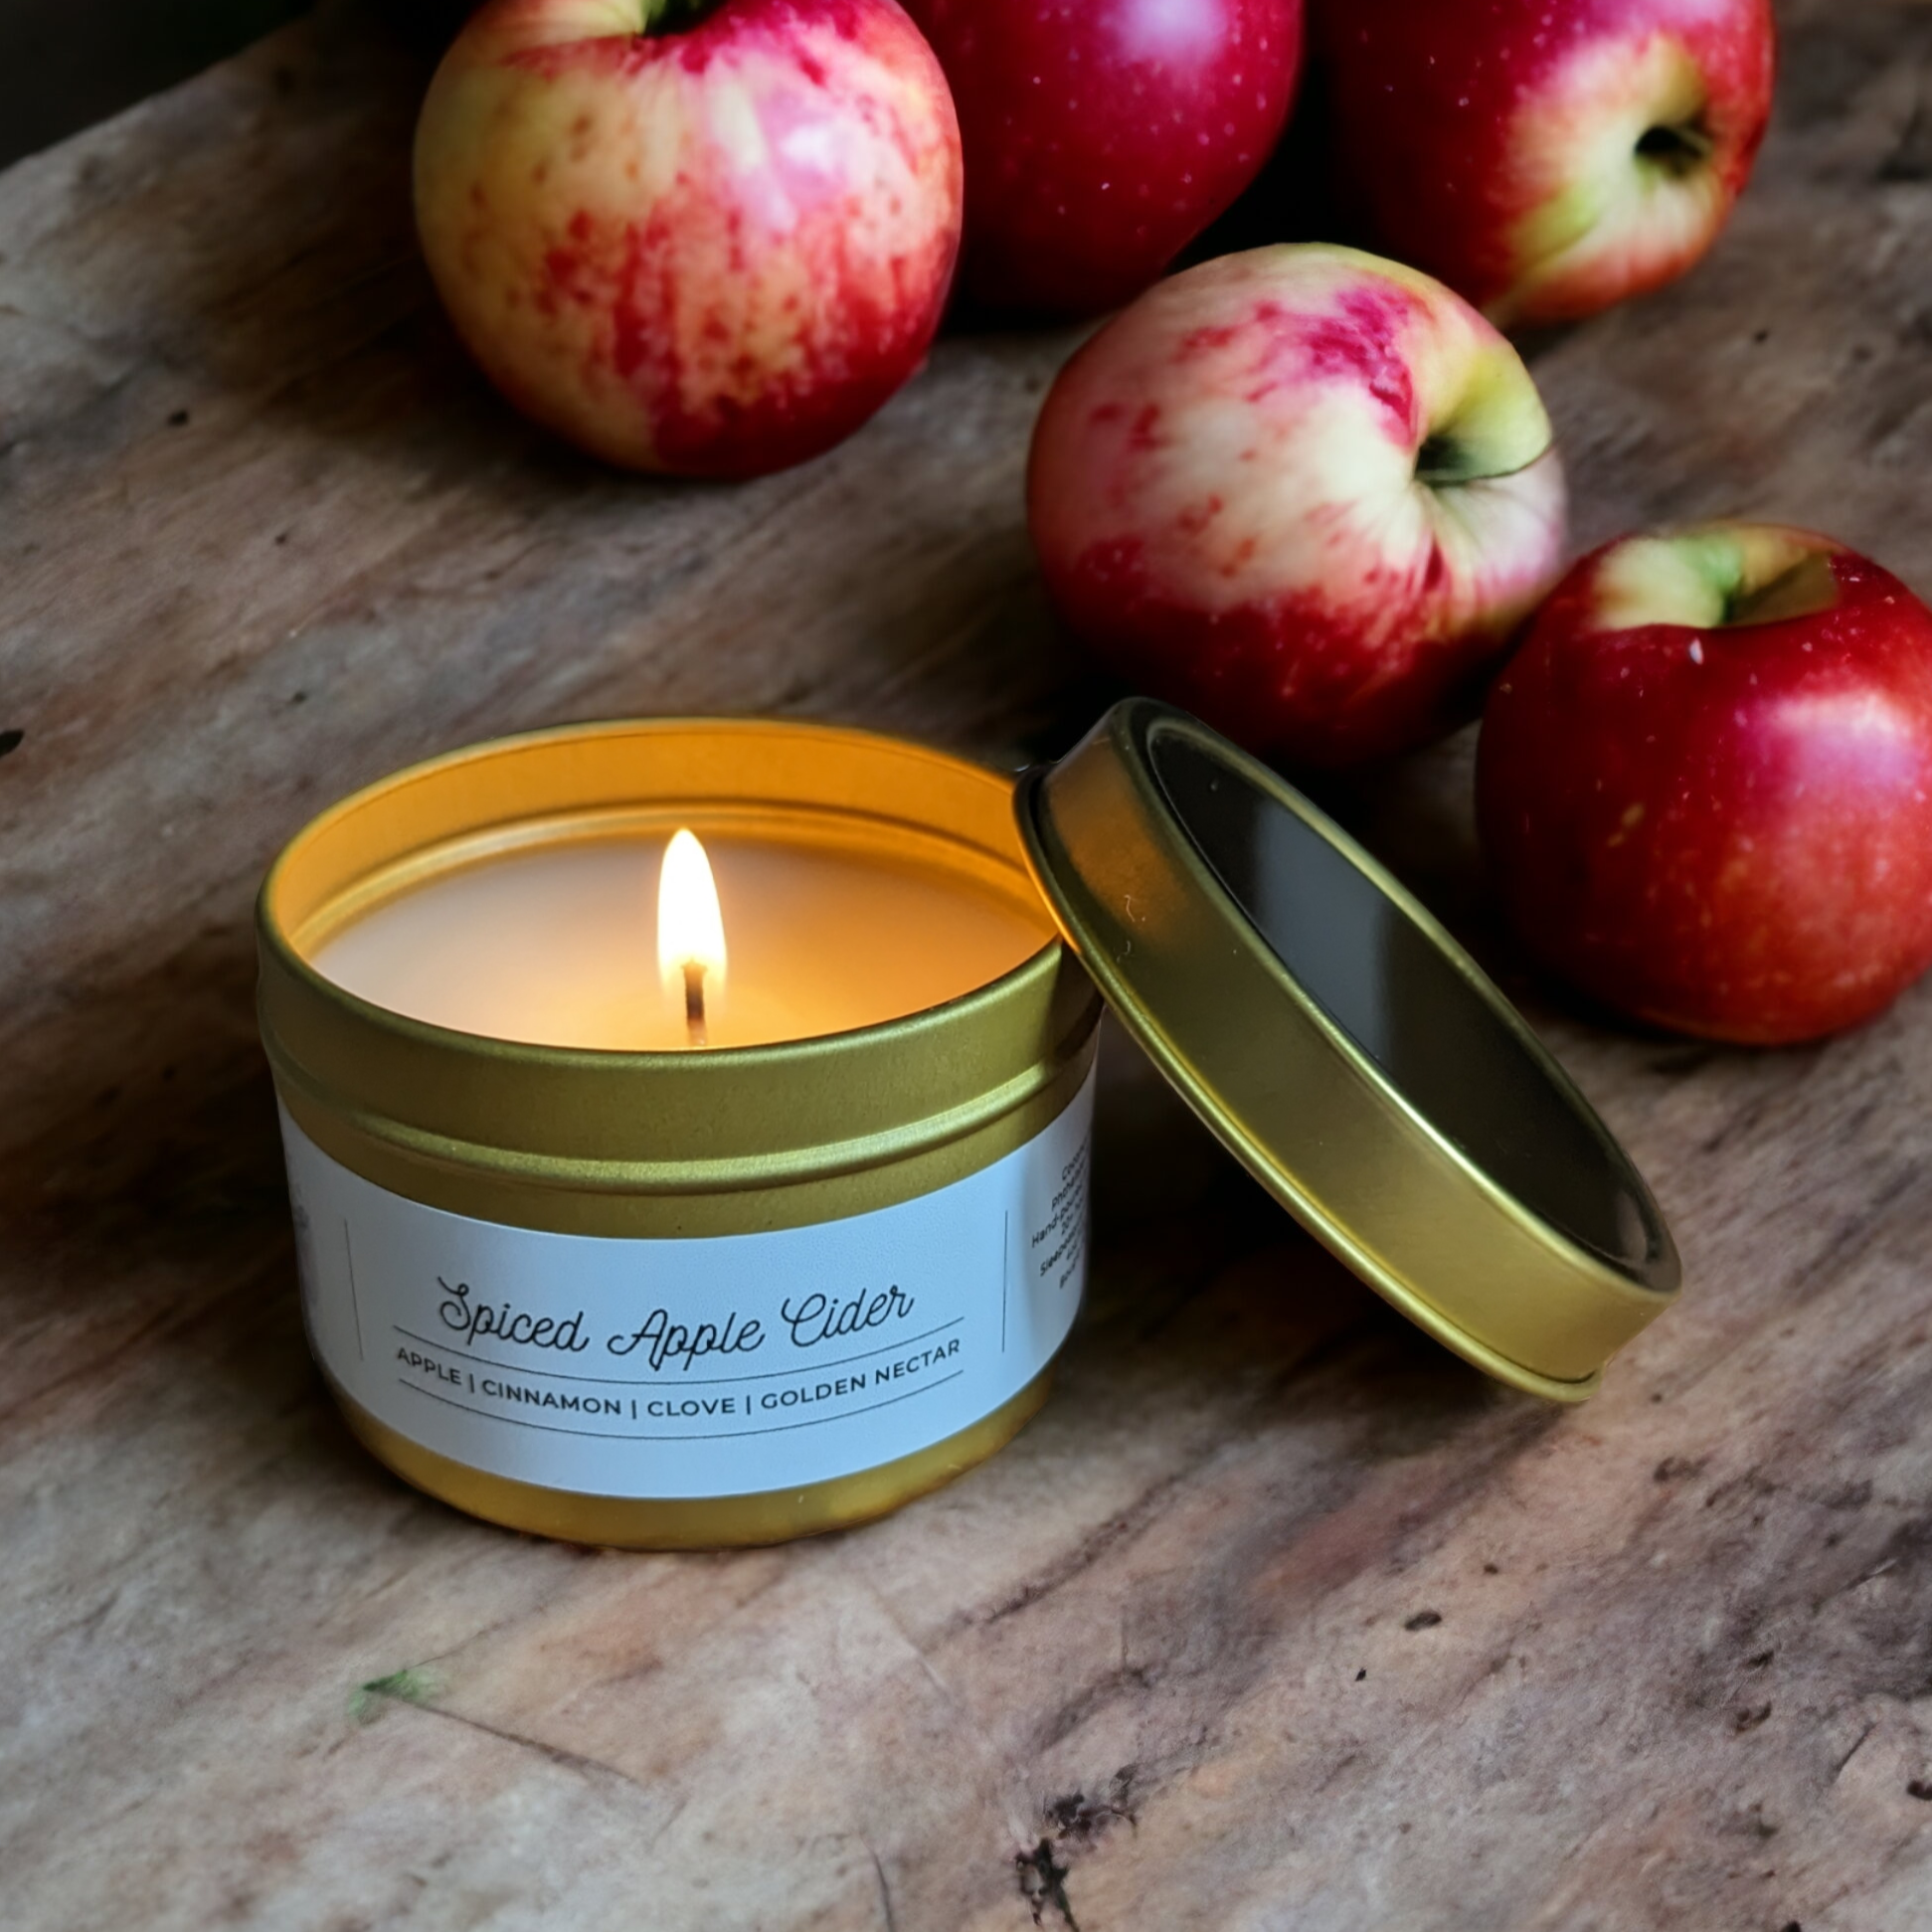 Spiced Apple Cider Candle in a Gold Tin is displayed on a wooden table with green and red apples in background. 